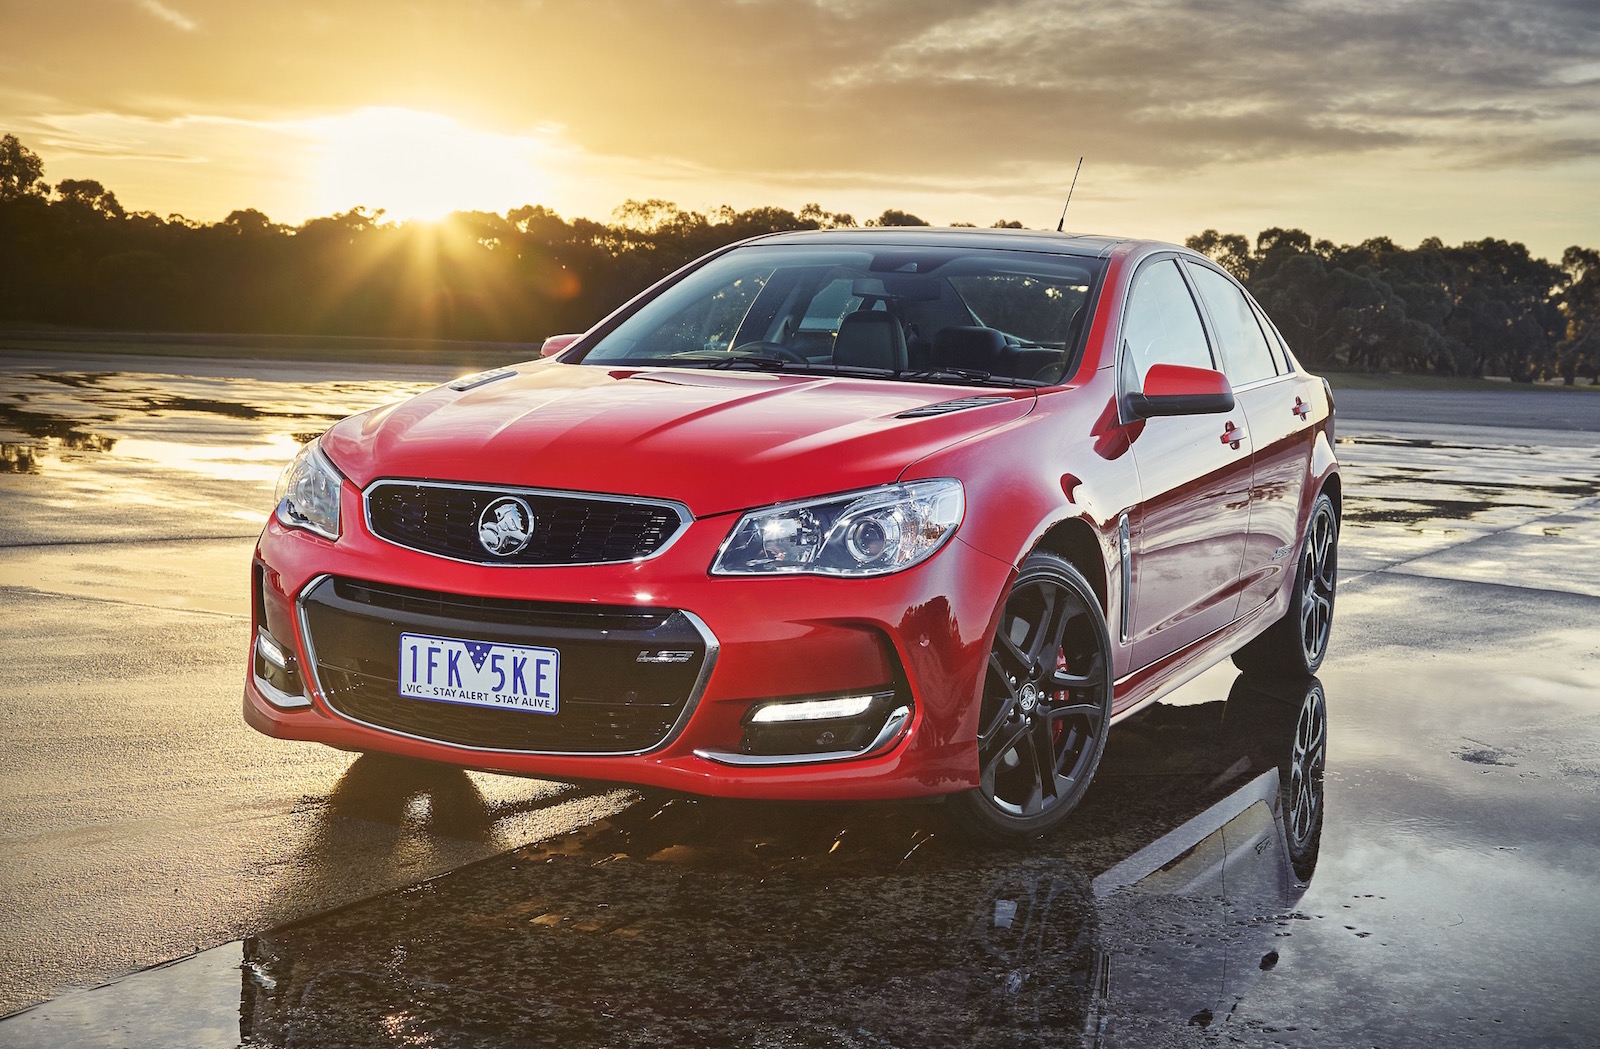 2016 Holden Commodore VF Series II unveiled, 304kW LS3 confirmed